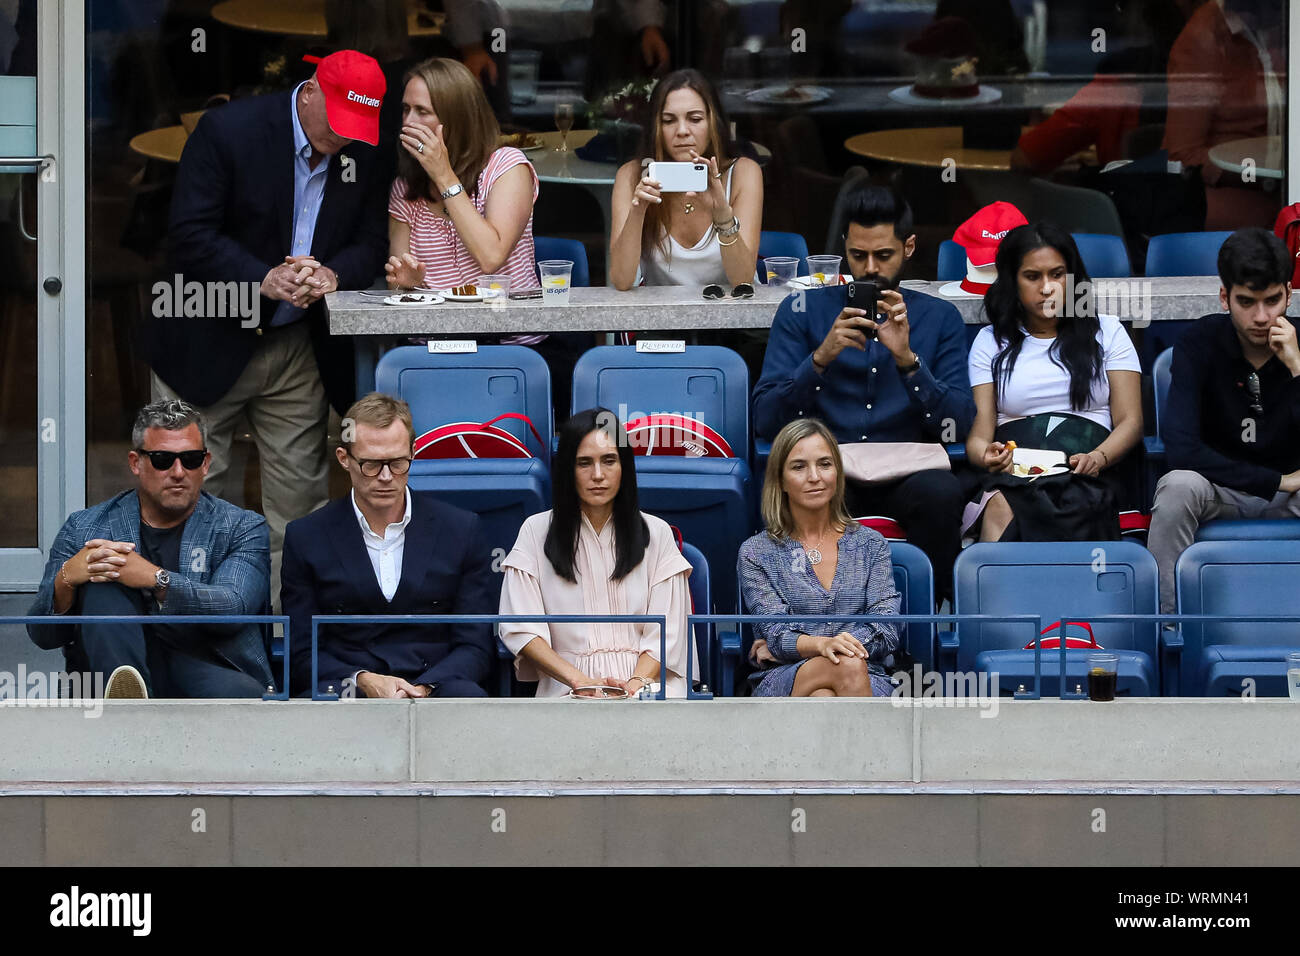 Jennifer Connelly and Paul Bettany Celebrities at the 2012 U.S. Open to  watch the Women's Final New York City, USA - 09.09.12 Stock Photo - Alamy